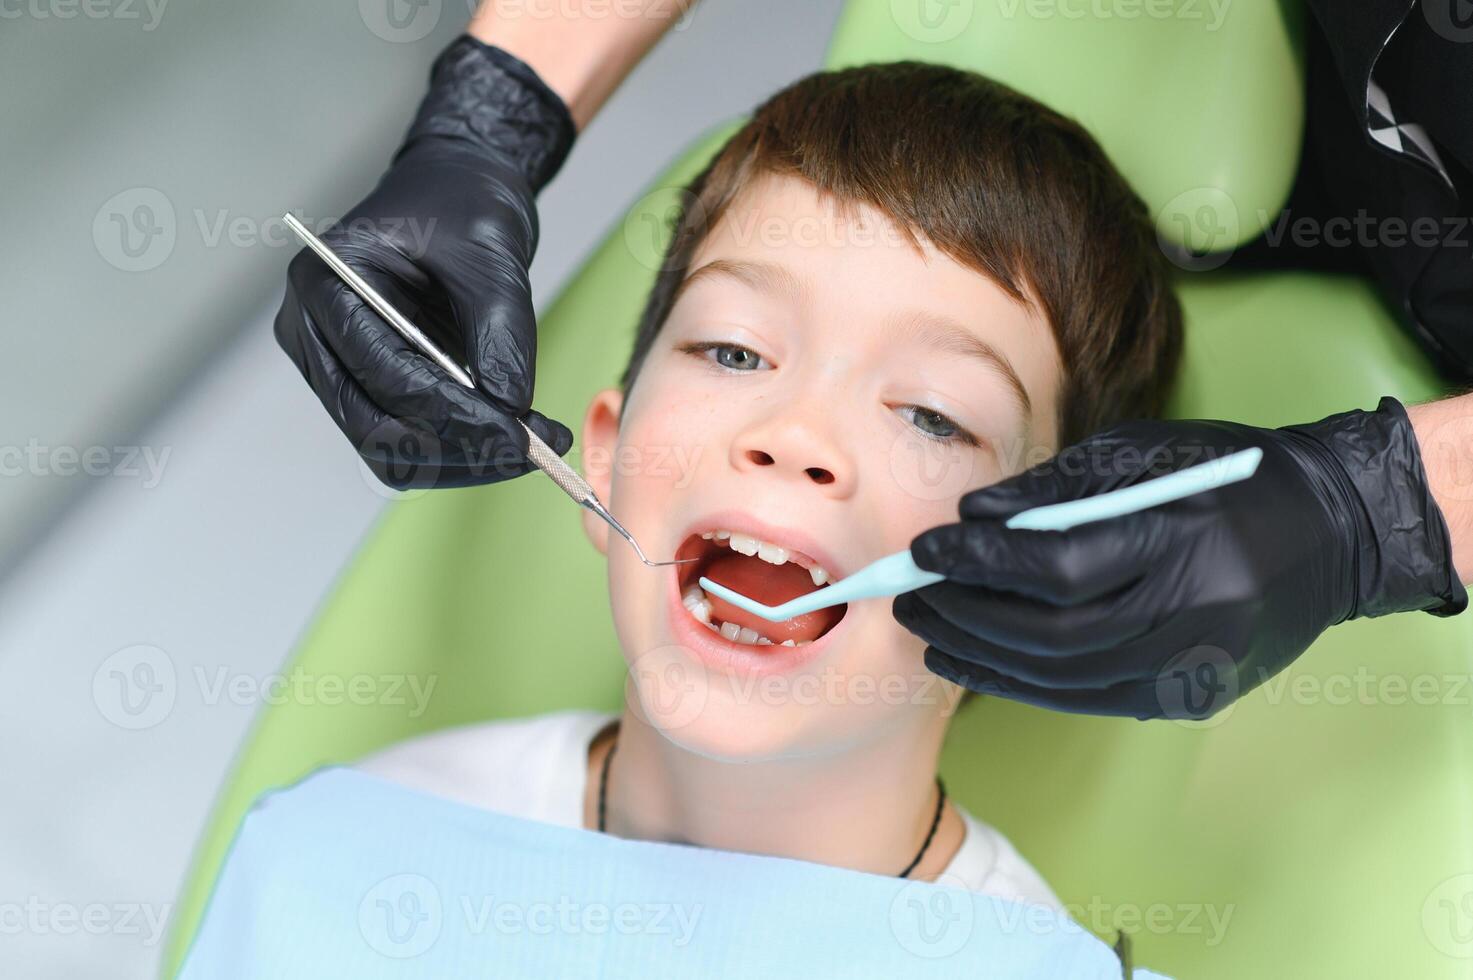 Close-up of little boy opening his mouth during dental checkup photo